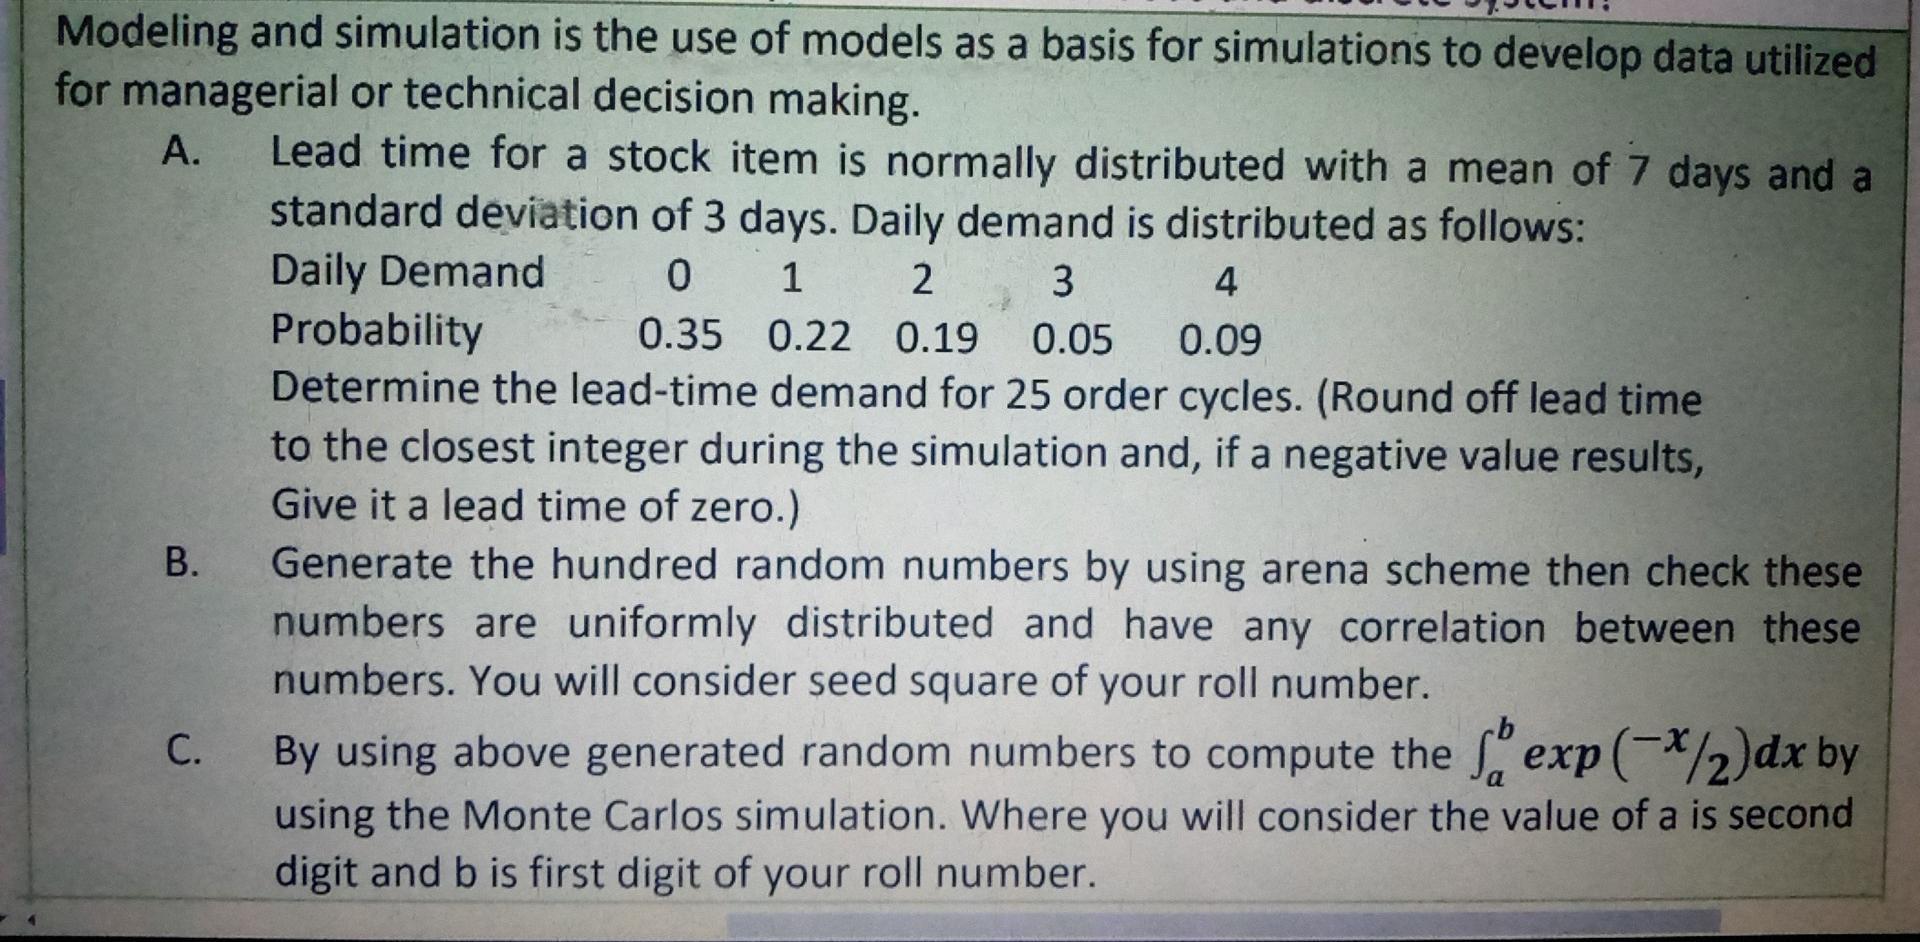 1 4 Modeling and simulation is the use of models as a basis for simulations to develop data utilized for managerial or techni